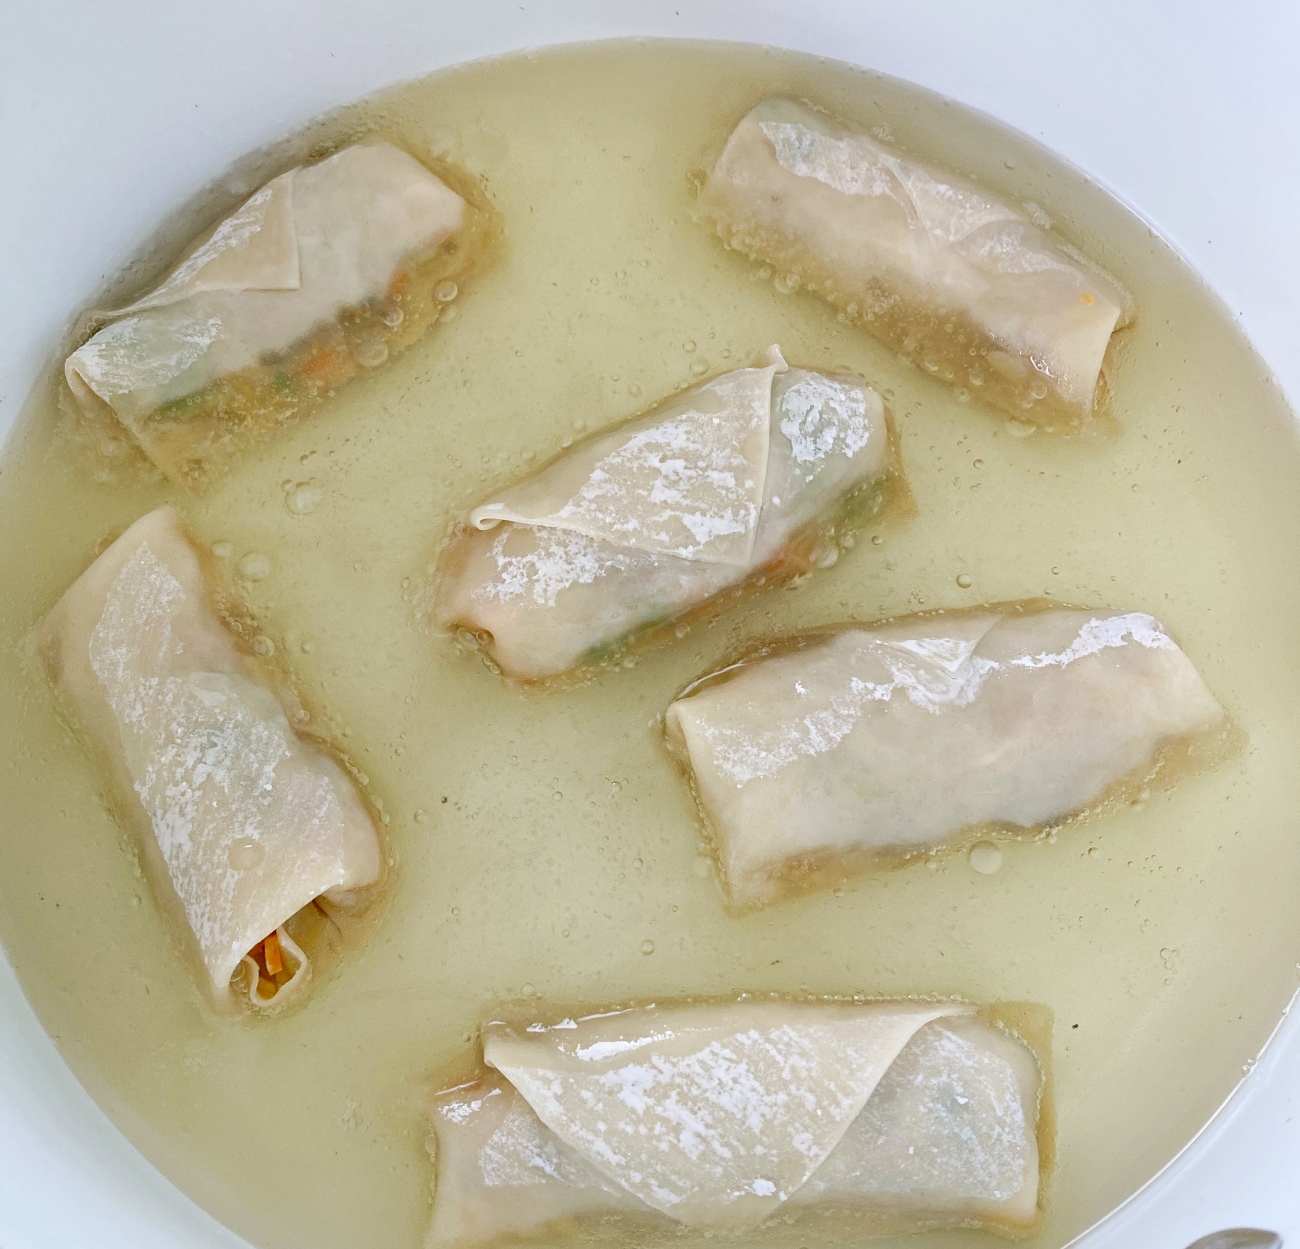 Clean and dry pot and add oil. Heat to medium-high. Add 5 lumpia at a time, frying until golden brown and bubbly on surface, about 5-6 minutes, turning only once if lumpia aren’t fully submerged in oil.